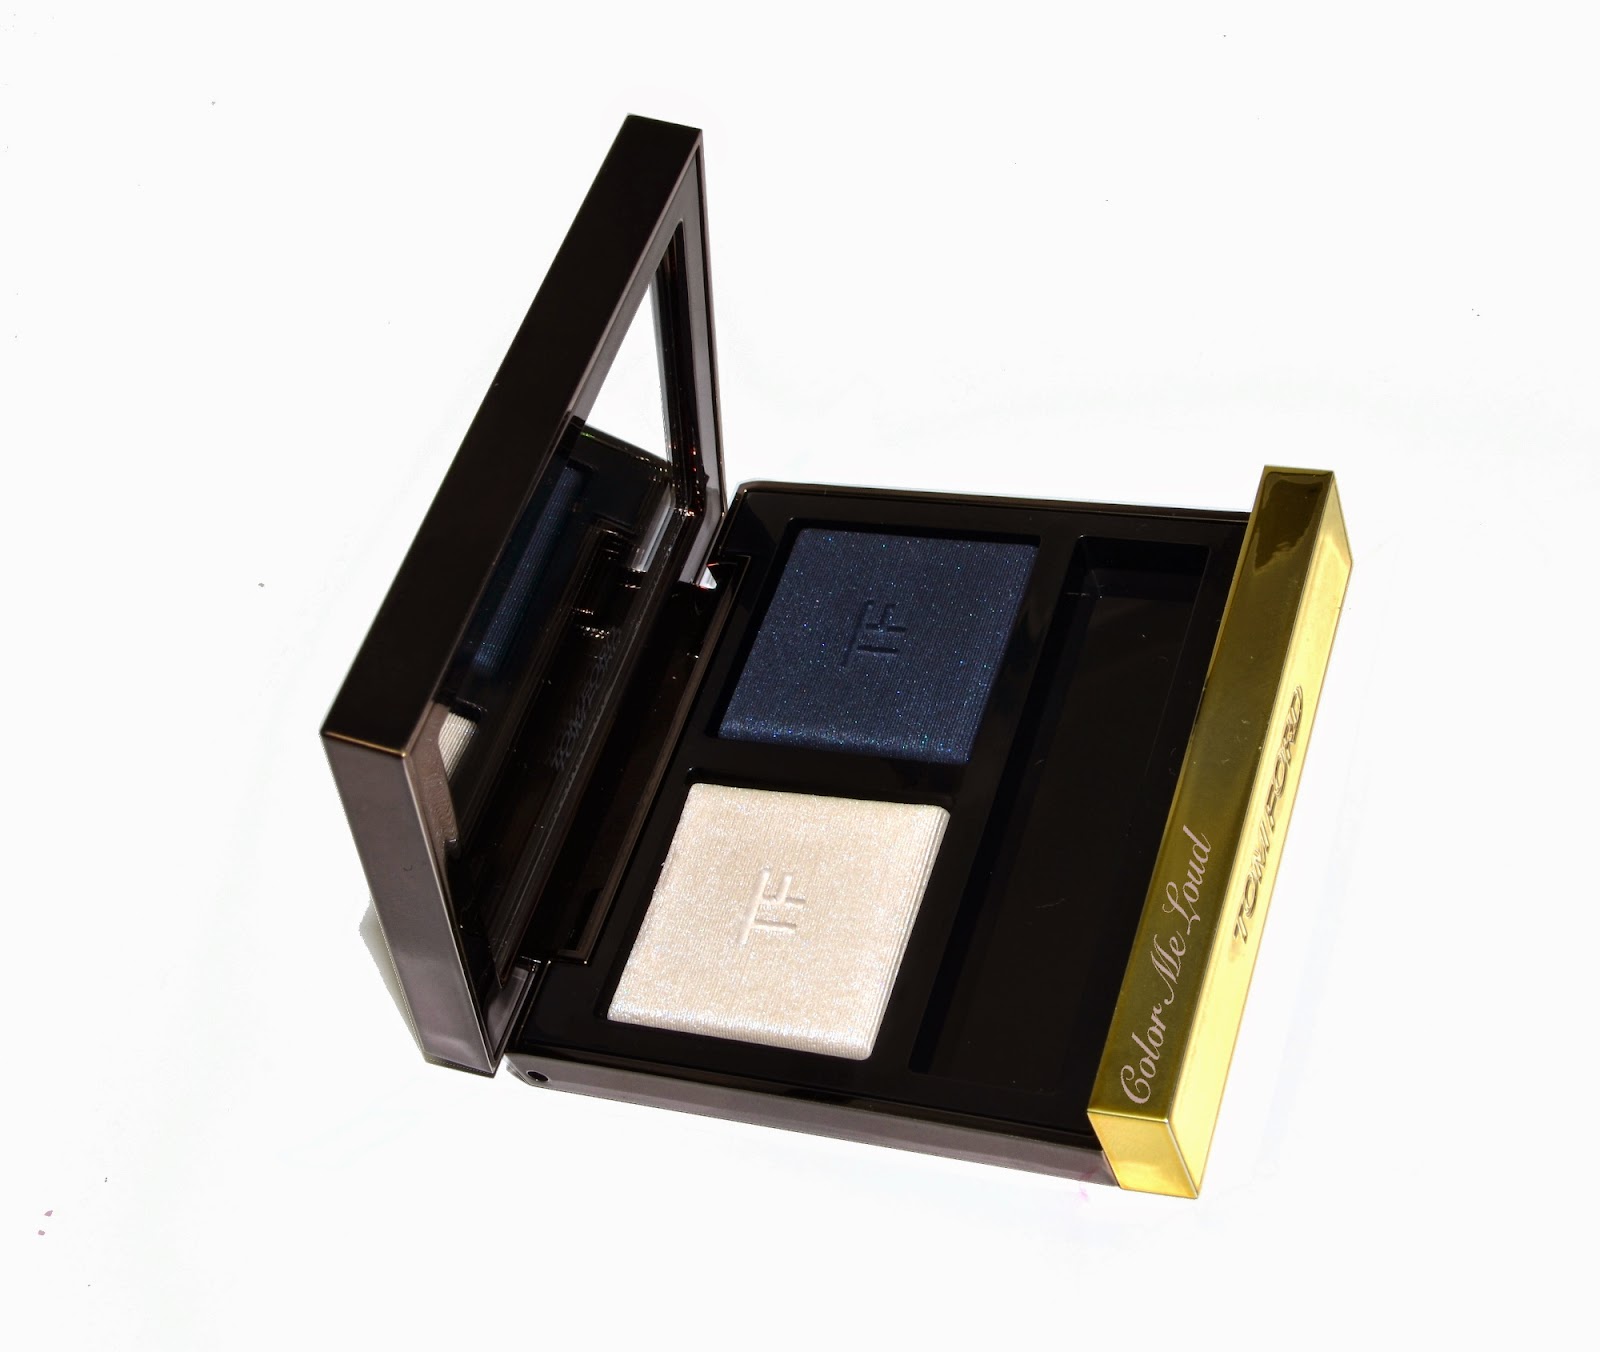 Tom Ford Eye Color Duo #03 Crushed Indigo, Review, Swatch, FOTD & Comparisons, for Spring 2015